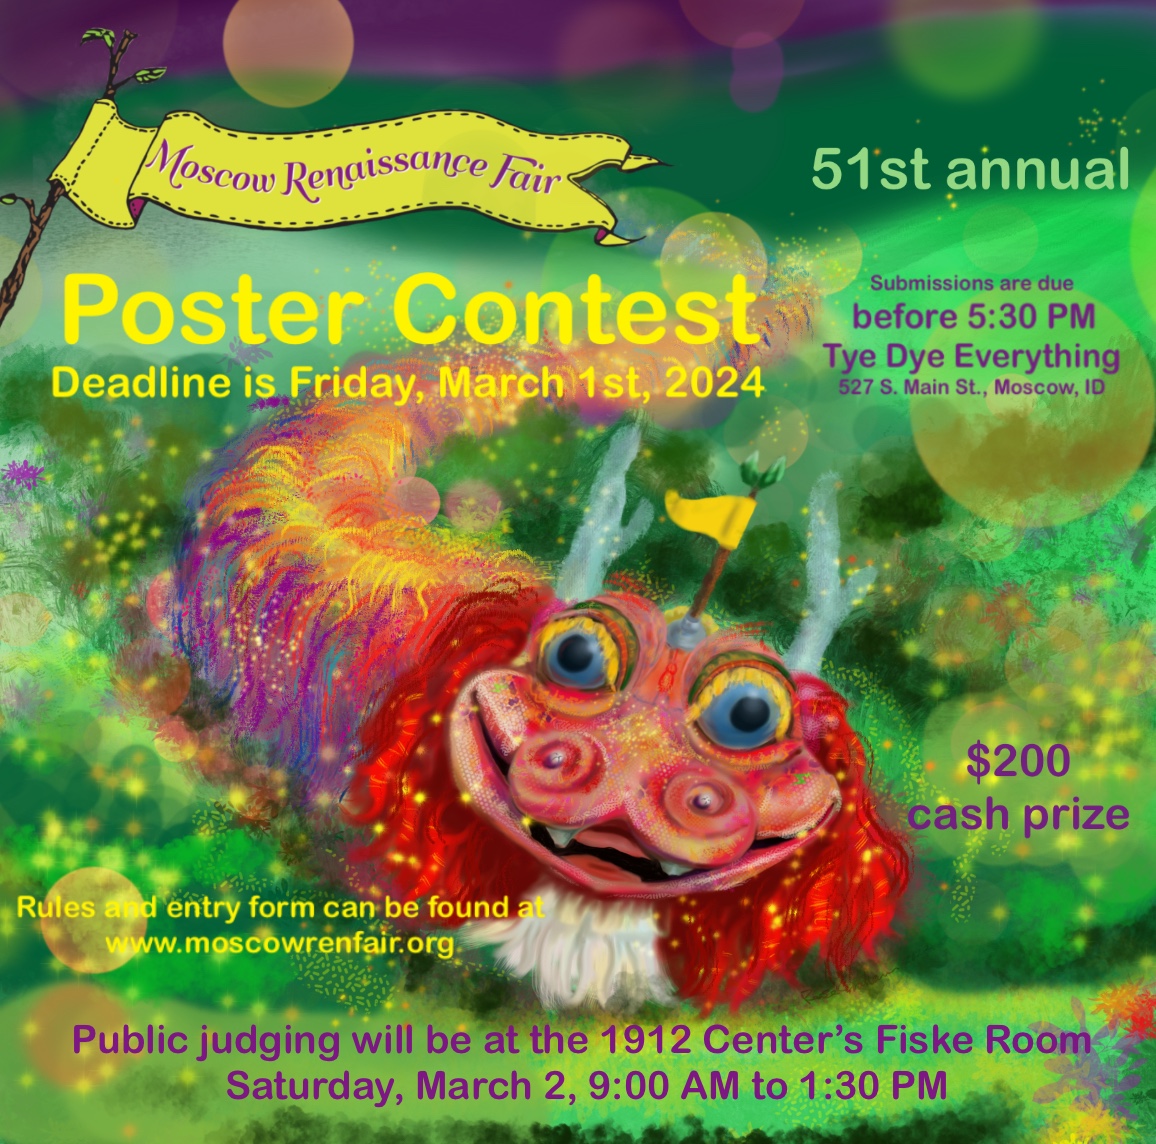 Poster contest for the 51st annual Moscow Renaissance Fair